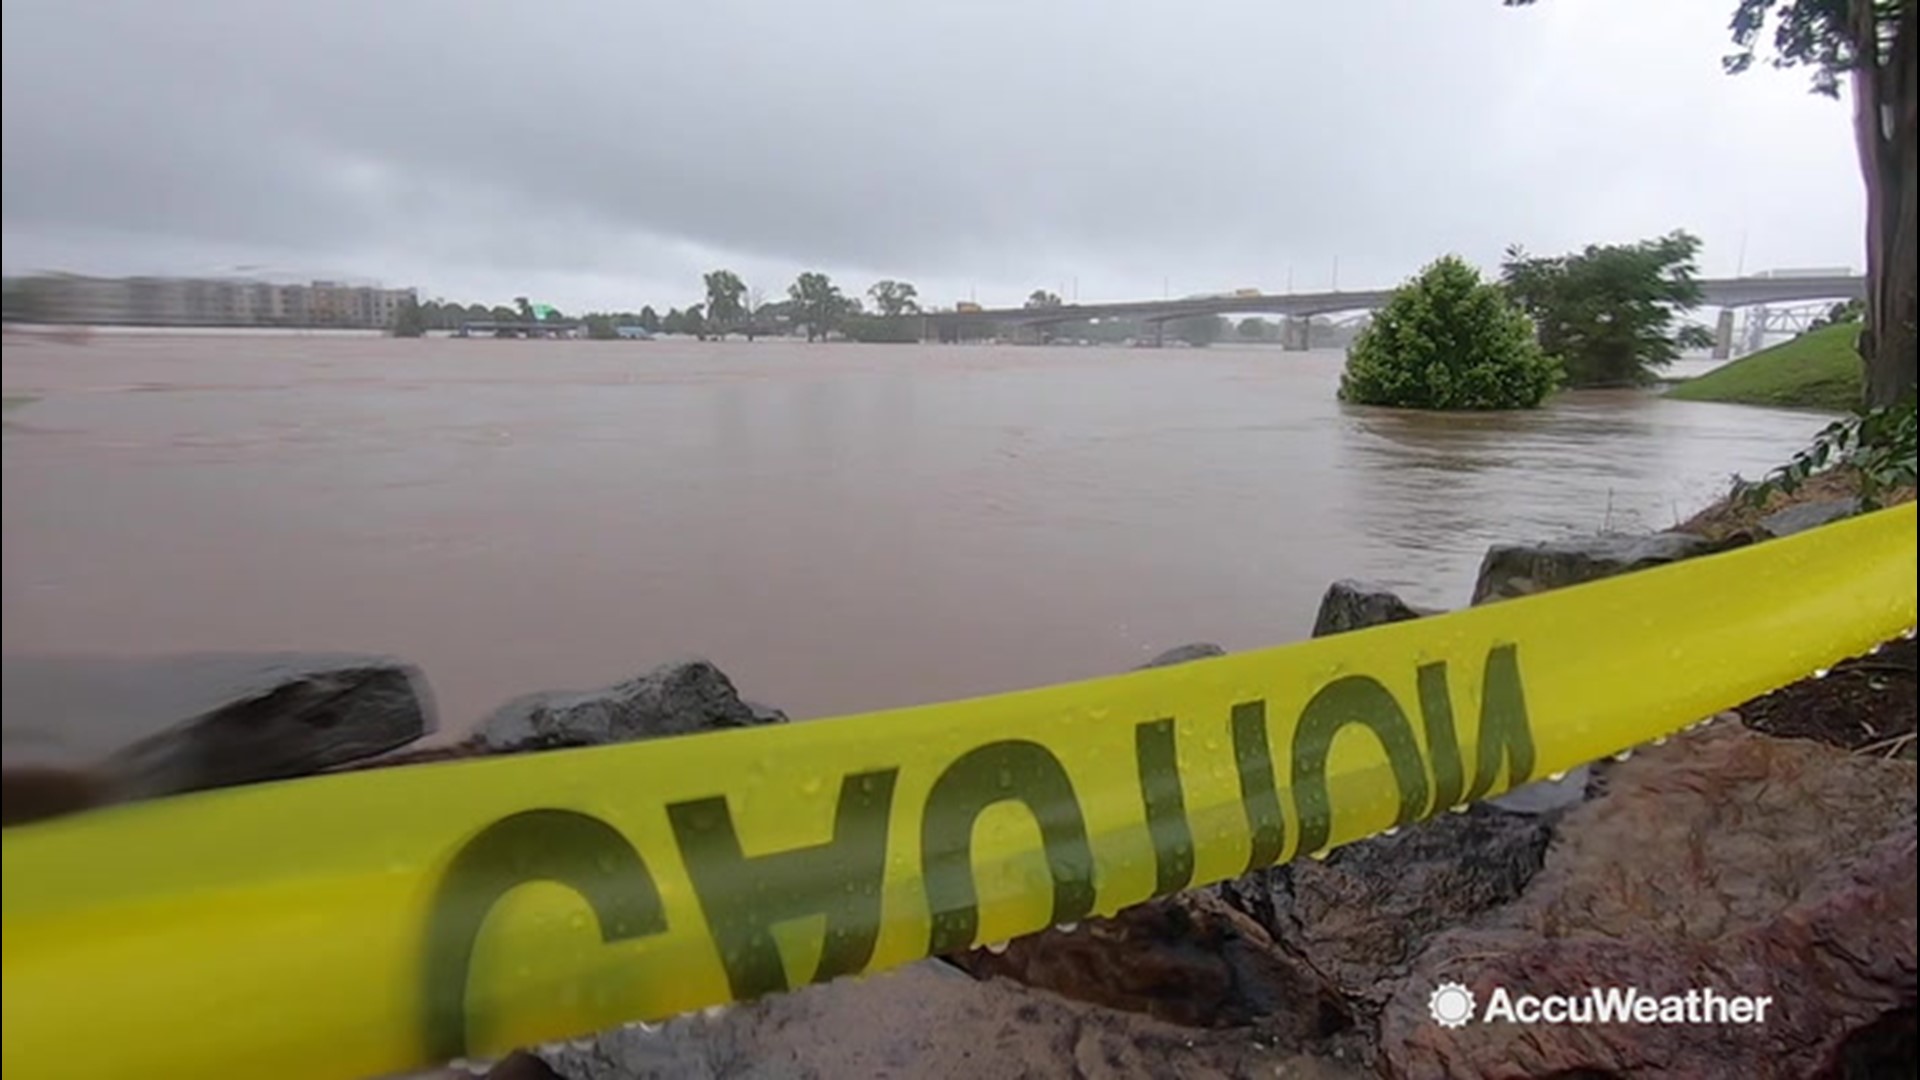 All hands on deck as the Arkansas Department of Emergency Management teams up with many state agencies, to combat flooding and keep residents safe. AccuWeather's Kena Vernon gives us a behind the scenes look and shows us the recovery effort.